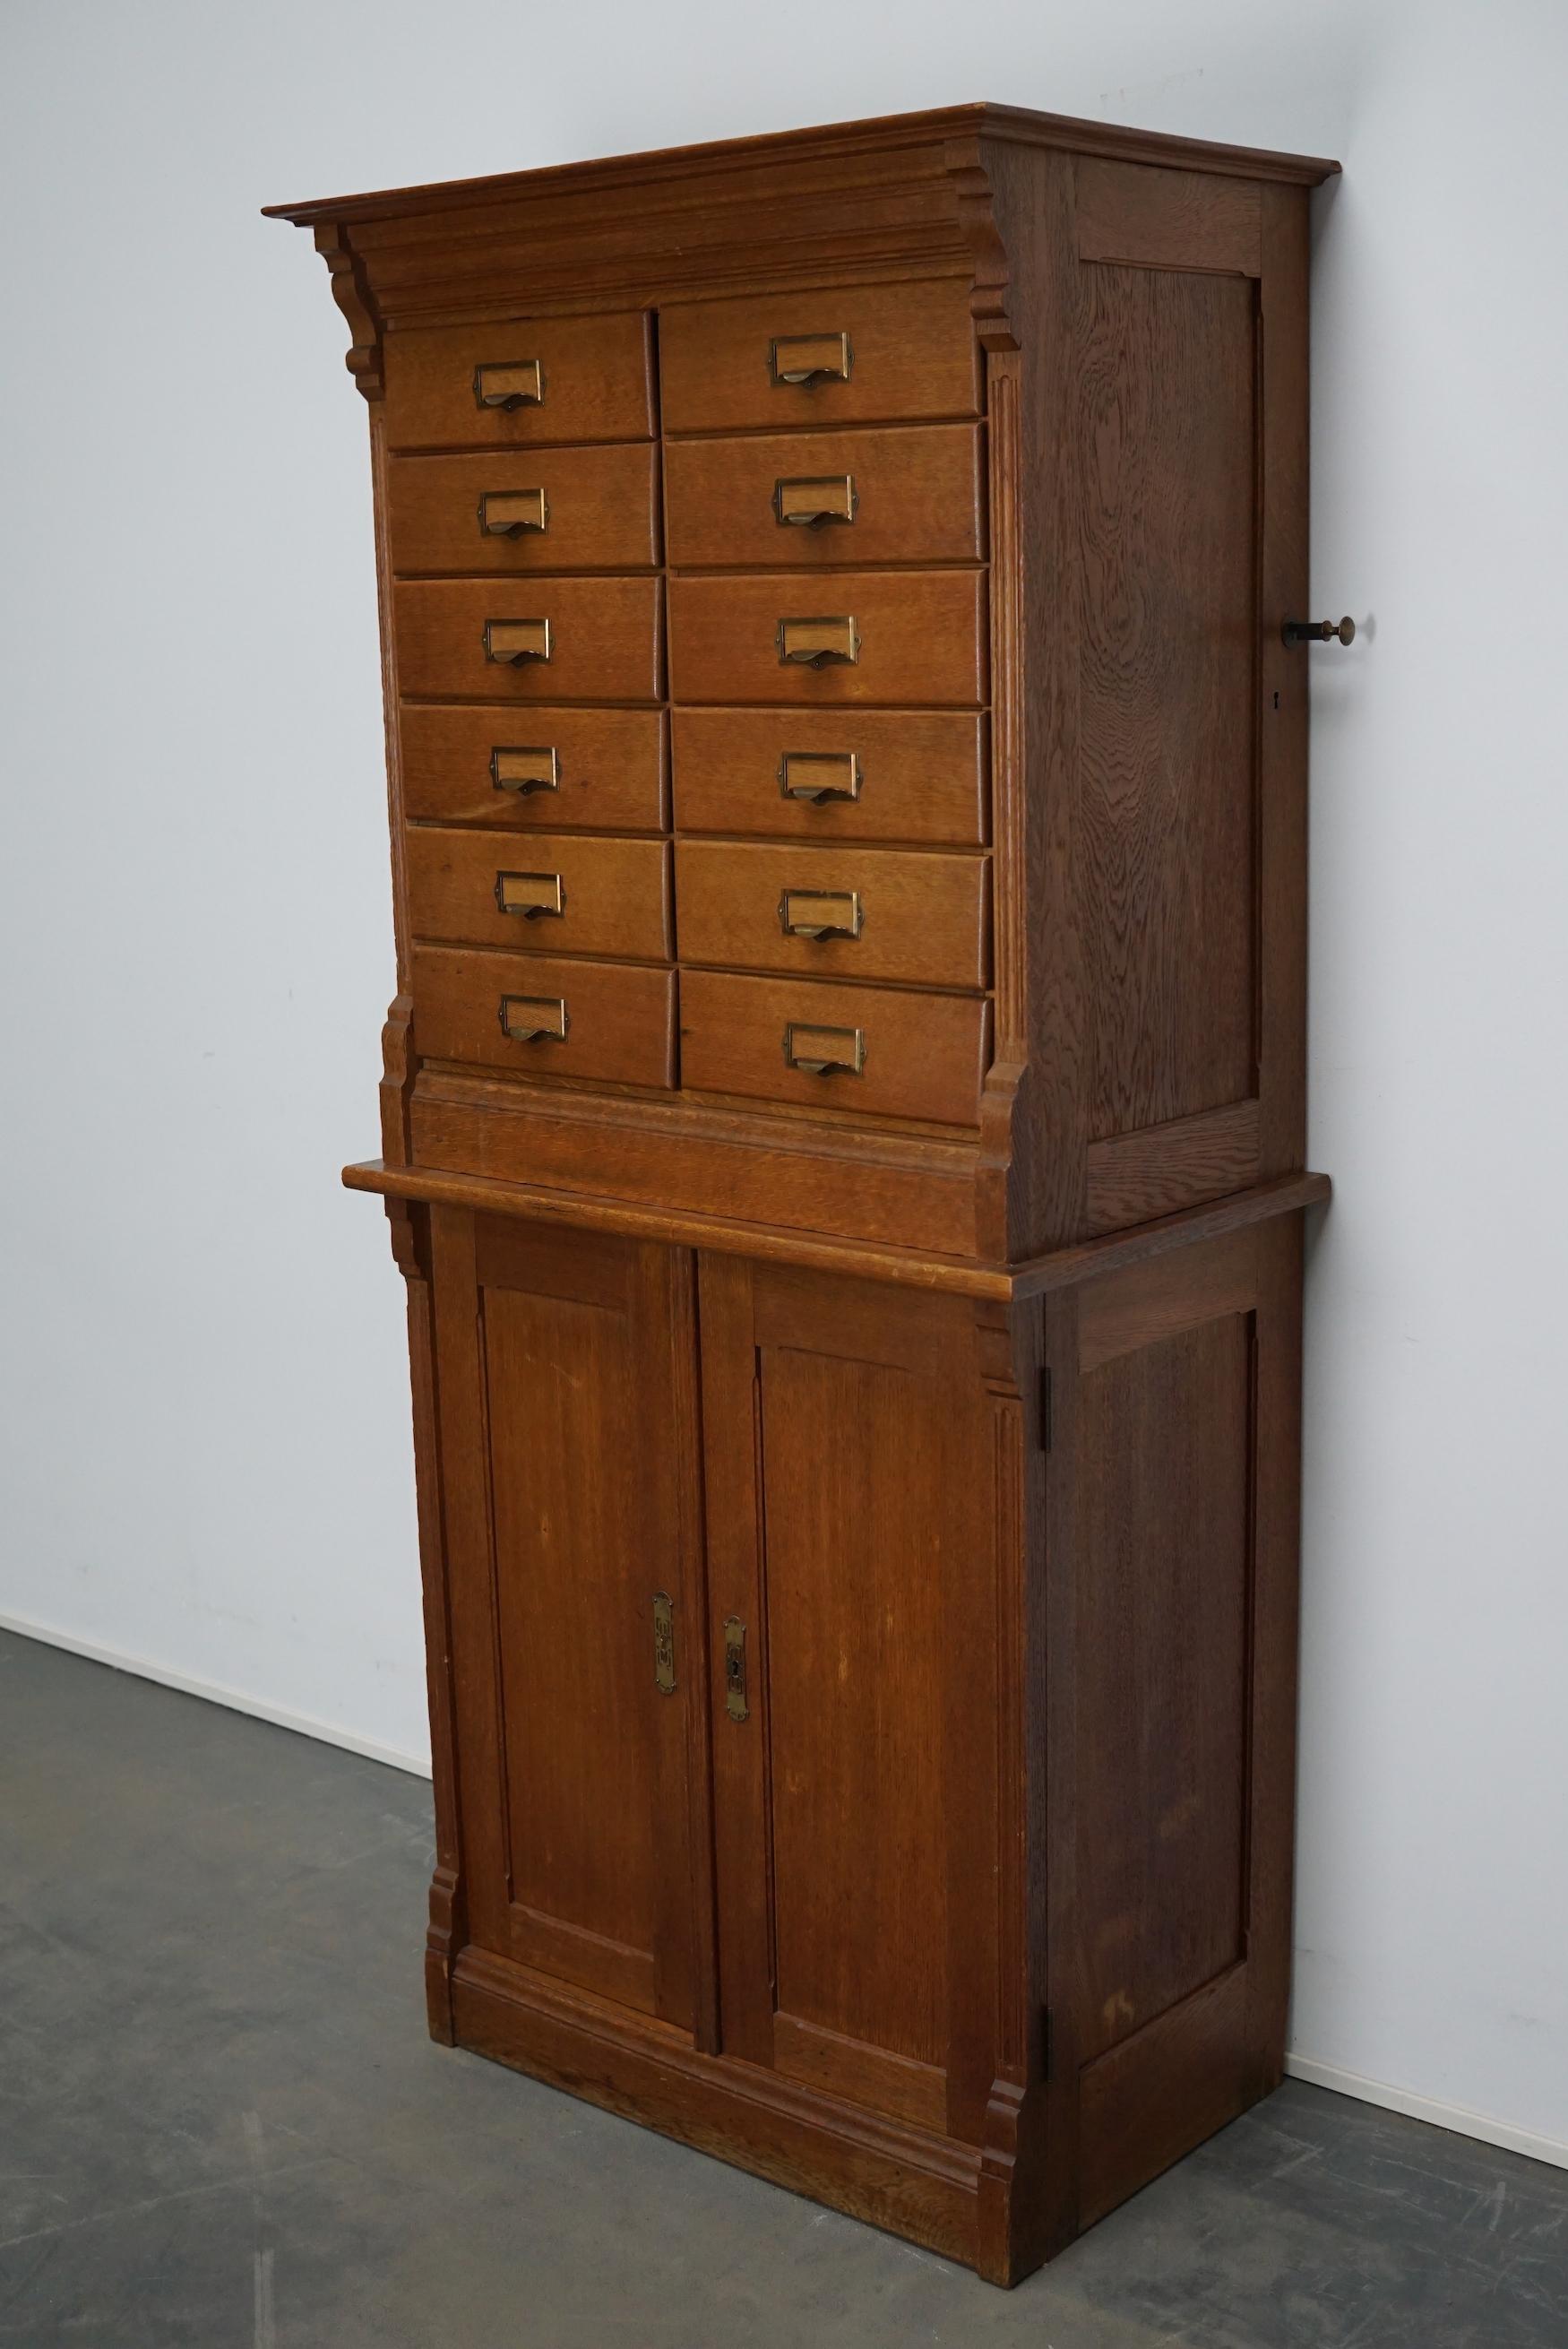 This apothecary cabinet was made circa 1930s in The Netherlands. It features 12 drawers with nice brass handles and two doors with shelves behind it. The drawers can be locked with a central locking mechanism, most of the drawers lock but the